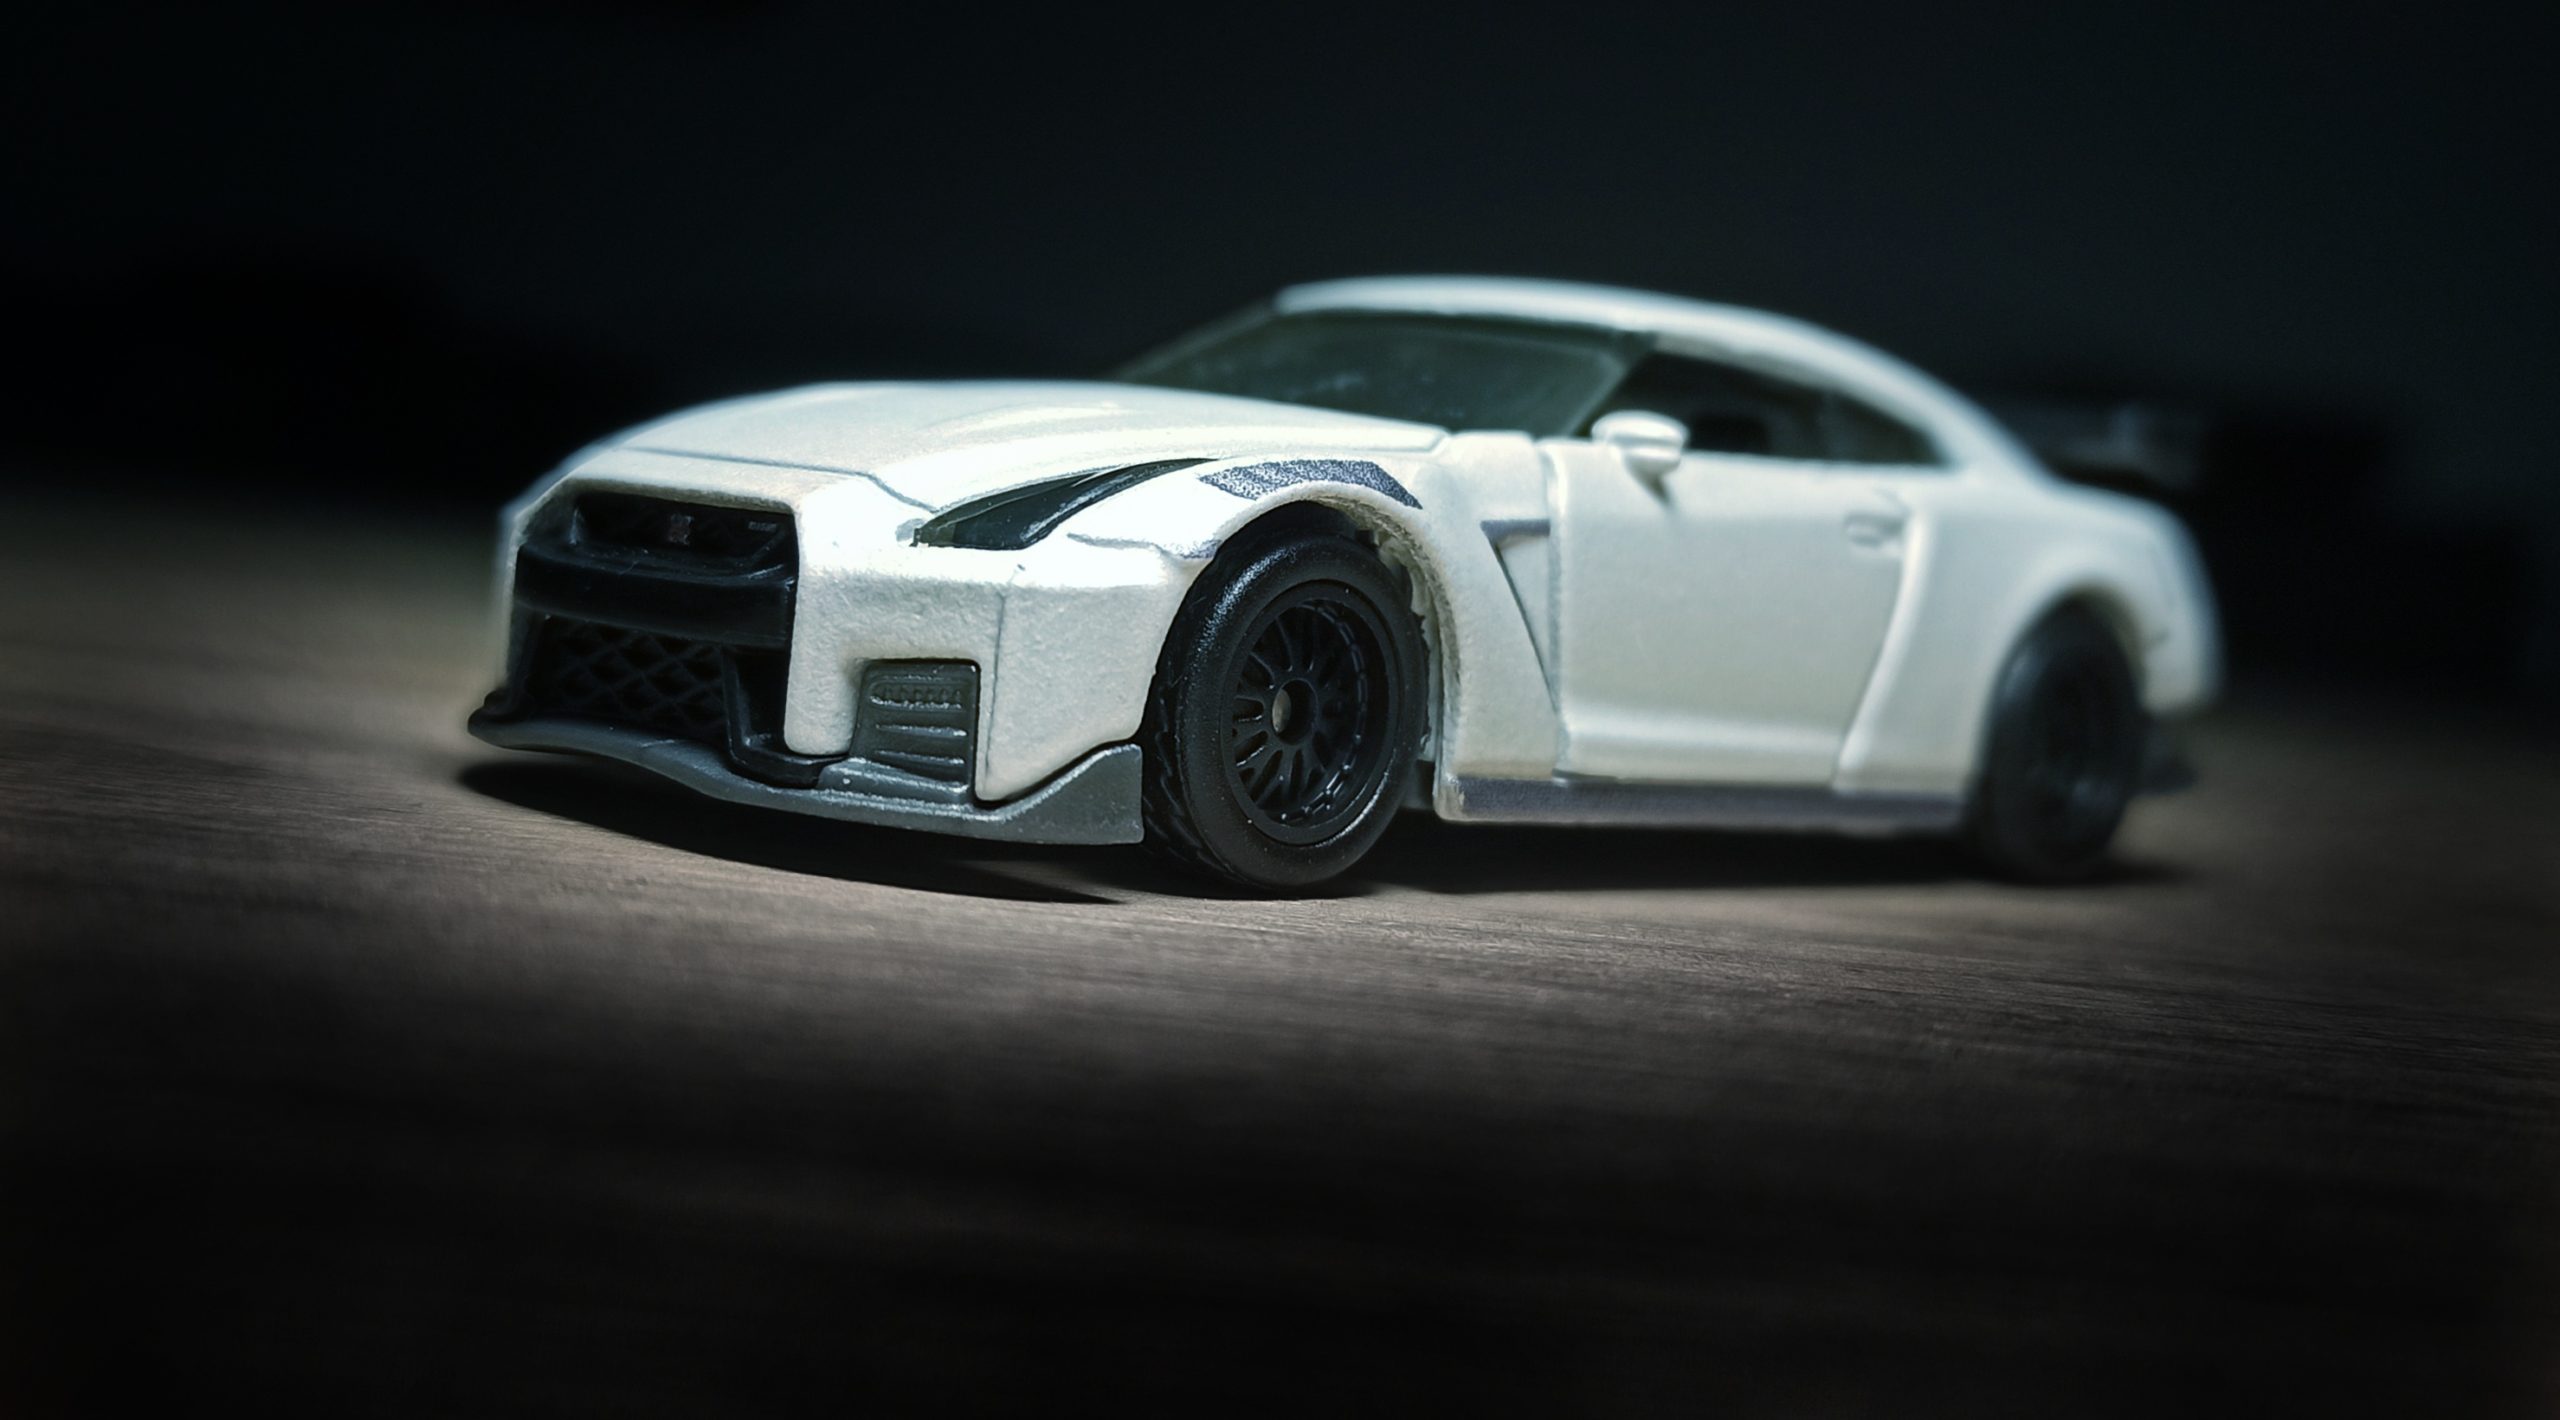 Matchbox Nissan GT-R NISMO (MB1258) 2021 MBX Collectors Series (18/20) white